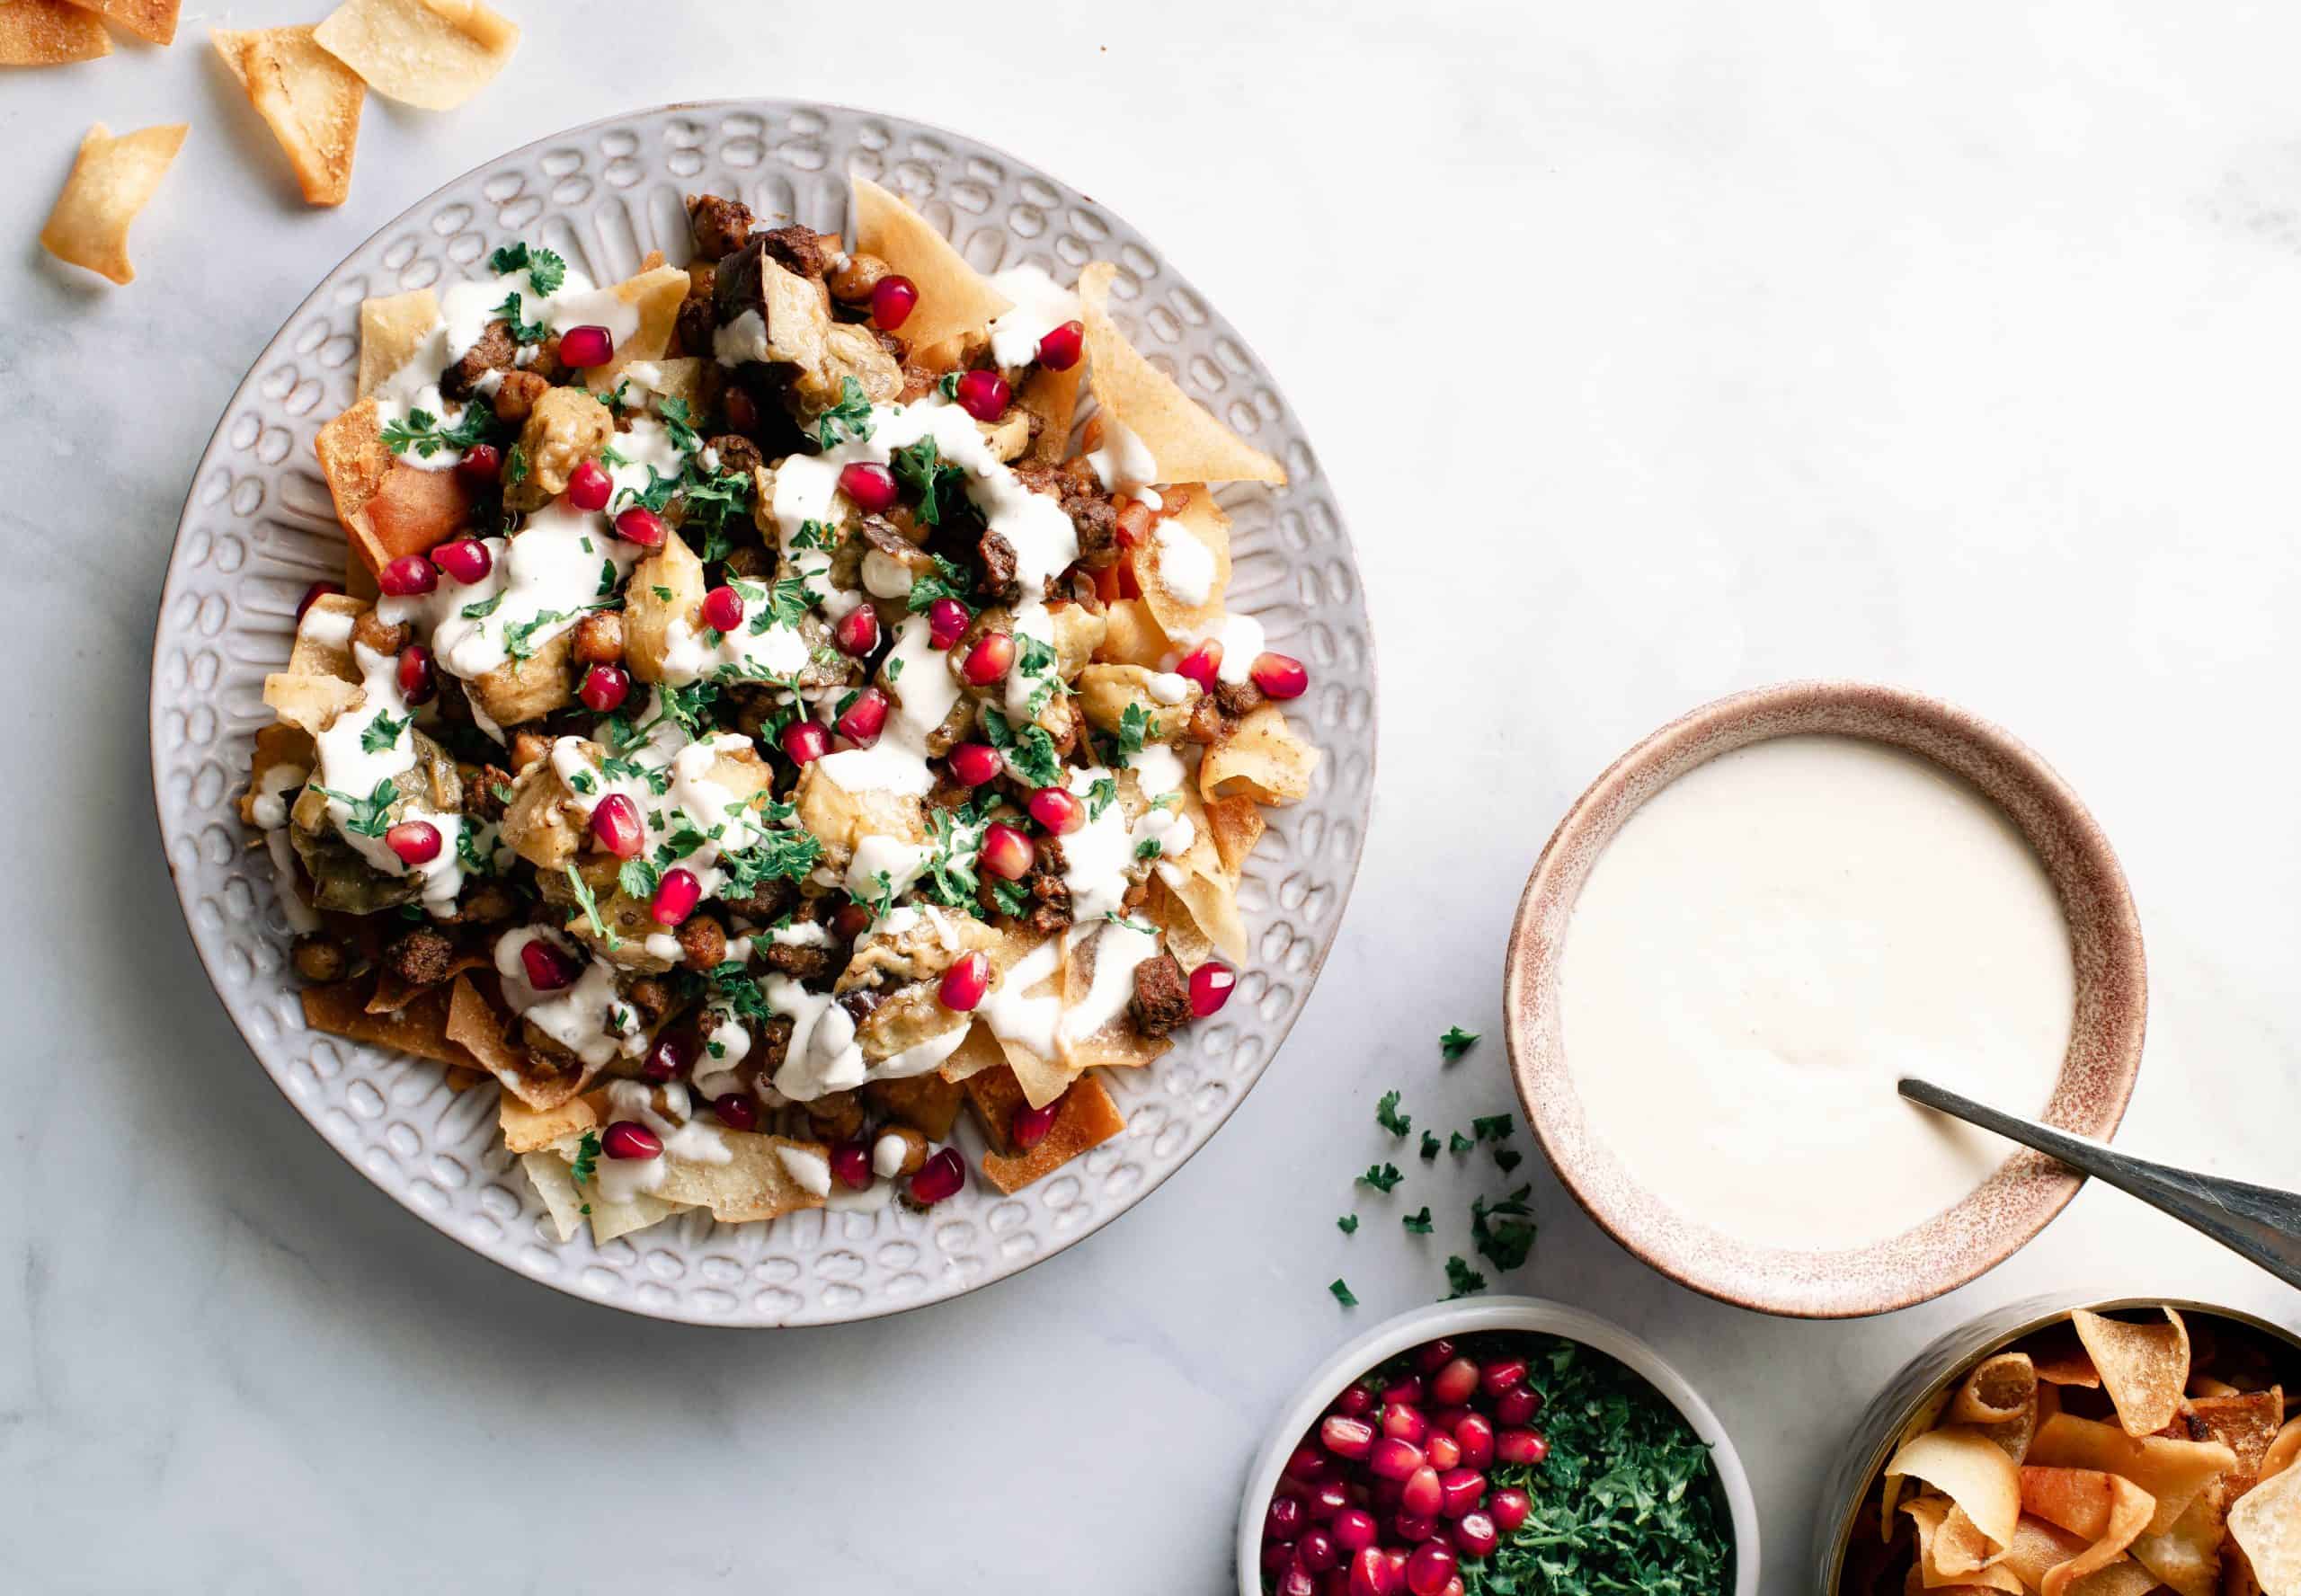 A plate full of Eggplant & Beef Fettah with small bowls of the ingredient: yogurt sauce, pita chips, parsley, & pomegrantes